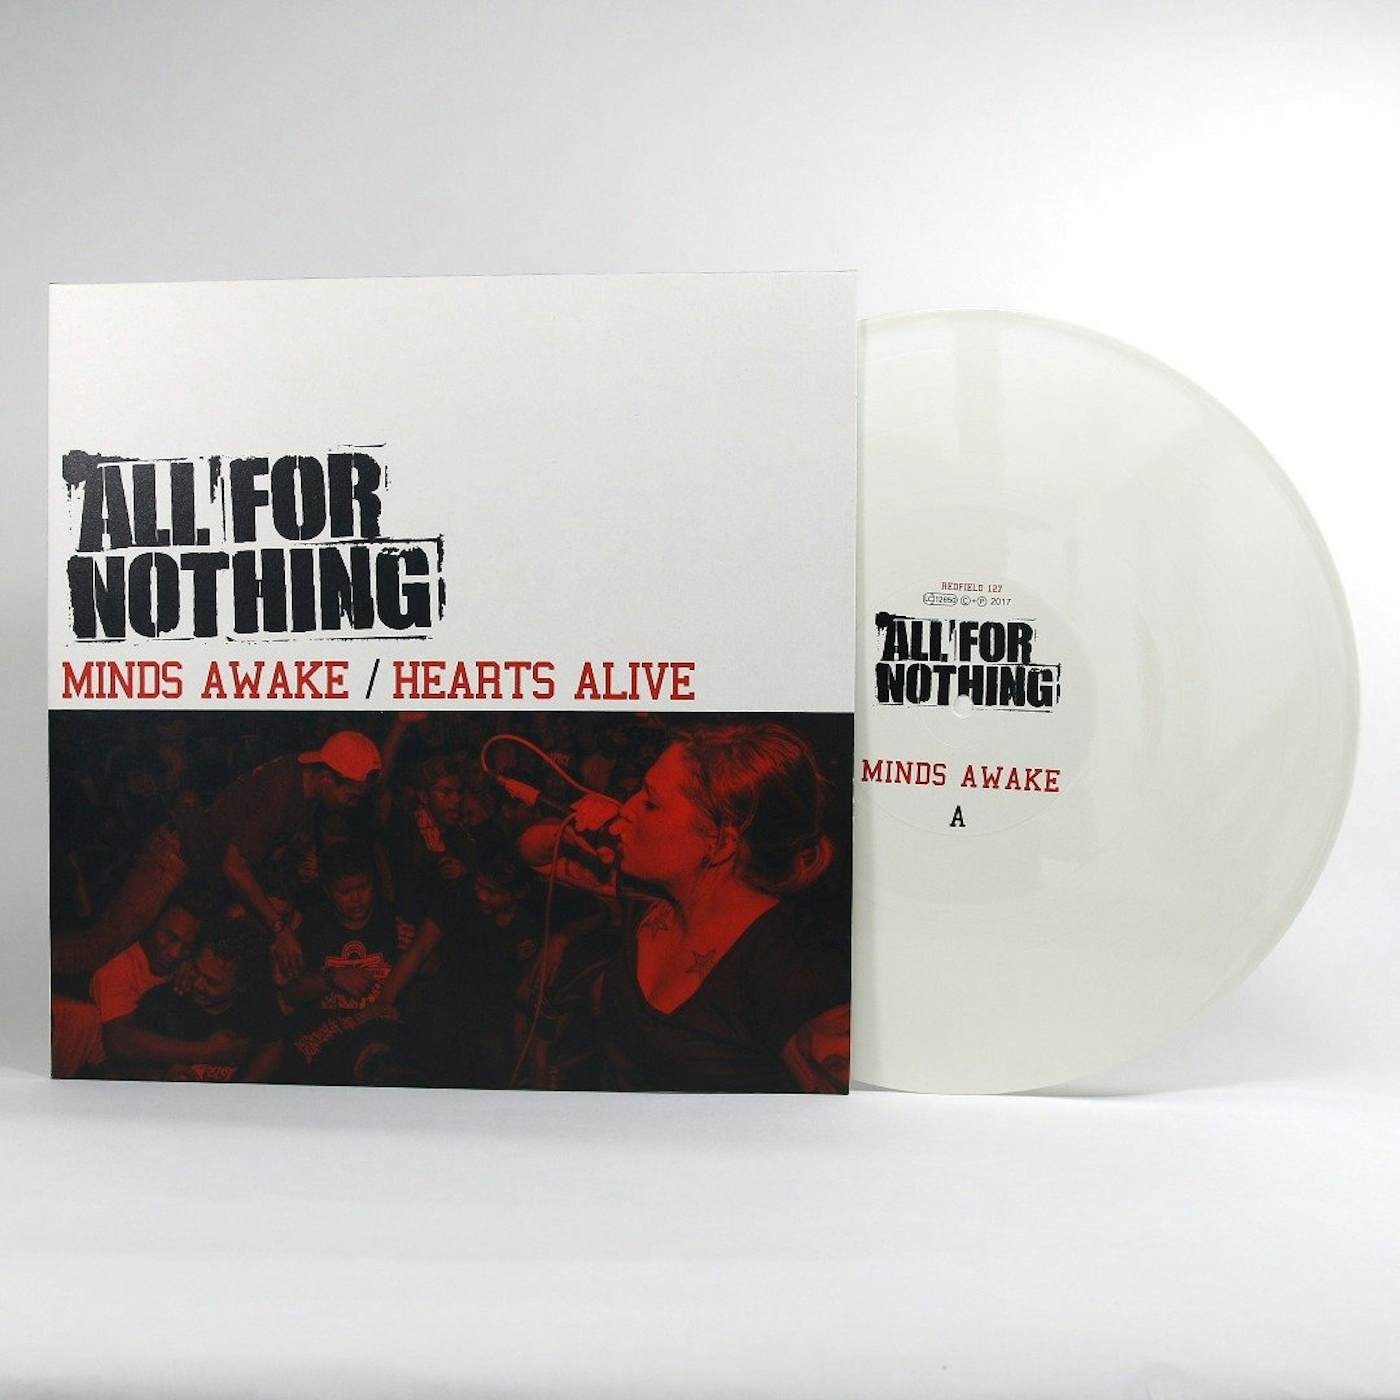 All For Nothing - Minds Awake / Hearts Alive - White Vinyl LP (2017)